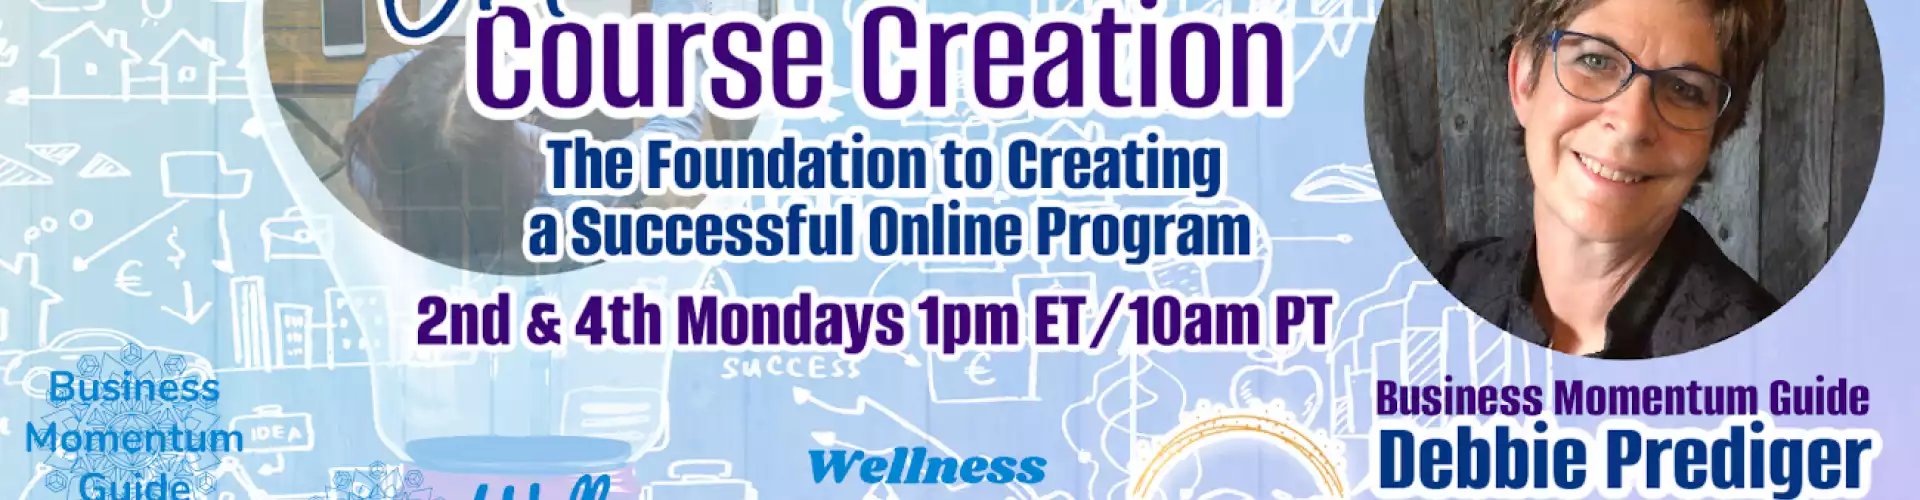 Online Course Creation with WU Business Strategy Expert Debbie Prediger